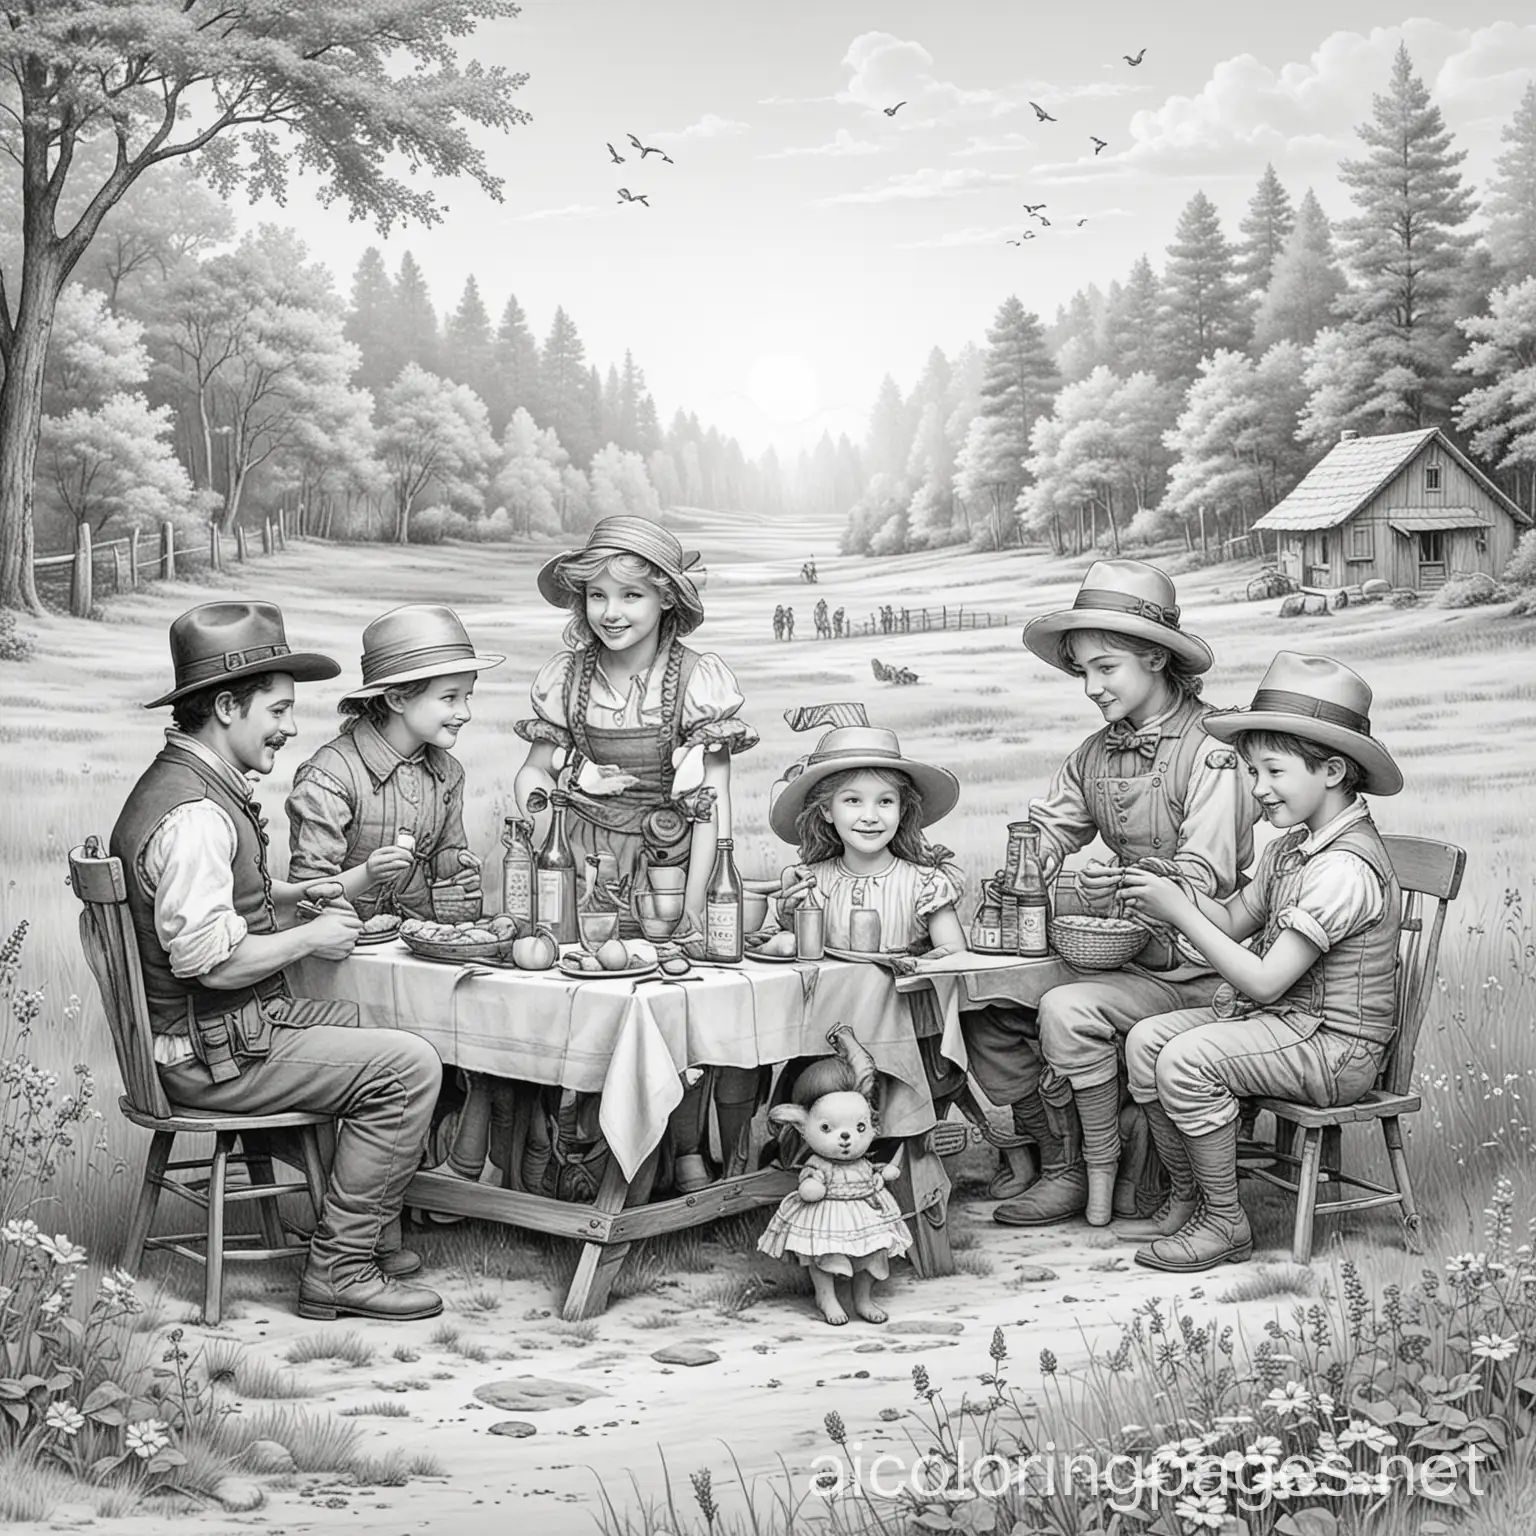 beneath a bright july sun, friends and family all enjoy a 4th of july picnic, Jean-Baptiste Monge style, Coloring Page, black and white, line art, white background, Simplicity, Ample White Space. The background of the coloring page is plain white to make it easy for young children to color within the lines. The outlines of all the subjects are easy to distinguish, making it simple for kids to color without too much difficulty, Coloring Page, black and white, line art, white background, Simplicity, Ample White Space. The background of the coloring page is plain white to make it easy for young children to color within the lines. The outlines of all the subjects are easy to distinguish, making it simple for kids to color without too much difficulty